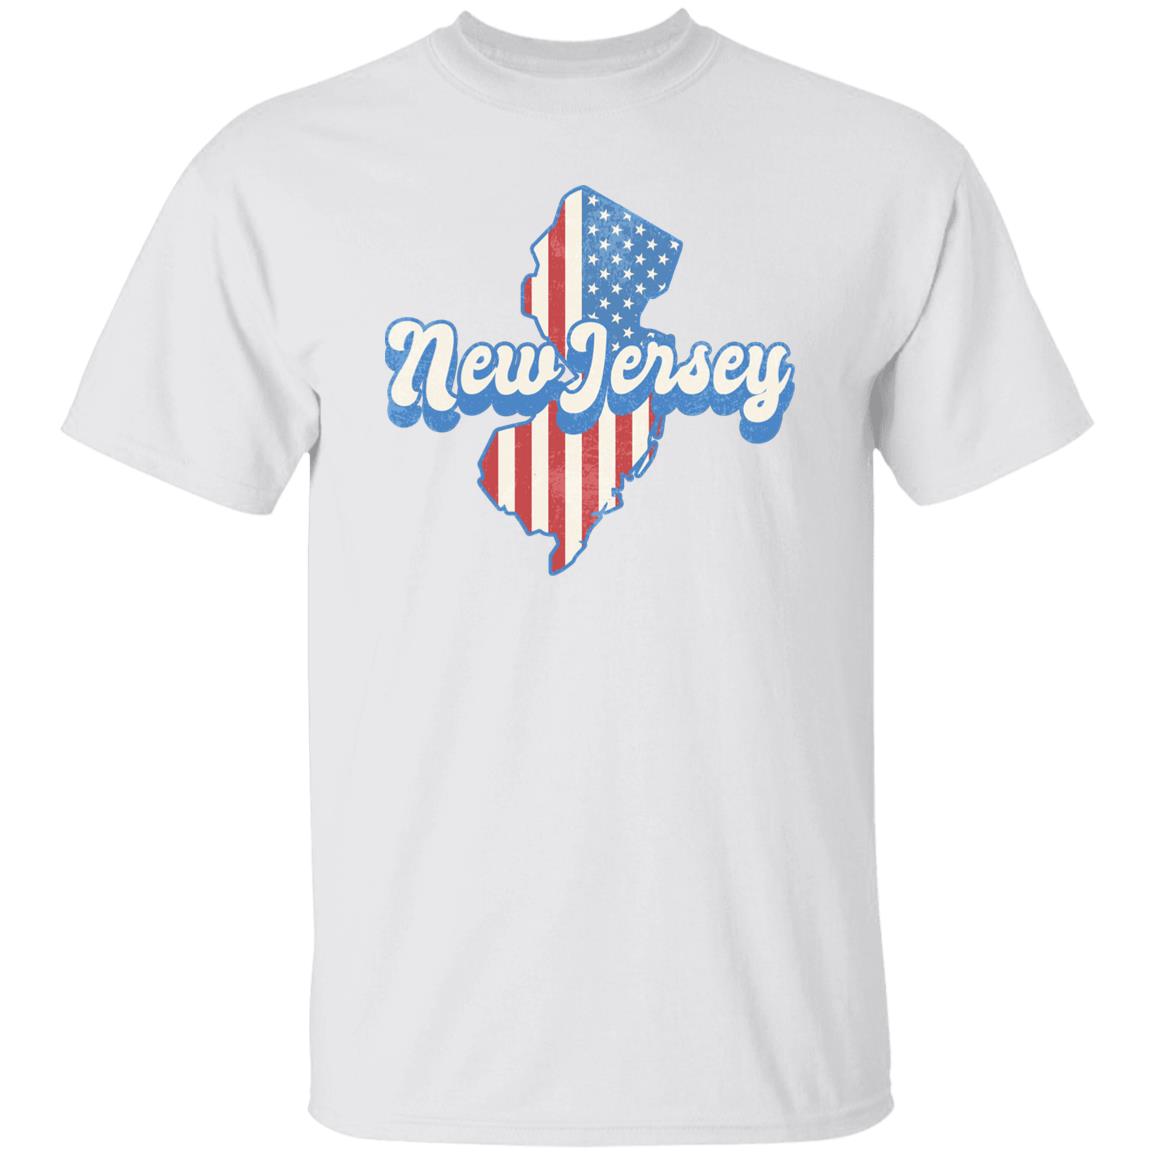 New Jersey US flag Unisex T-Shirt American patriotic NJ state tee White Ash Blue-White-Family-Gift-Planet